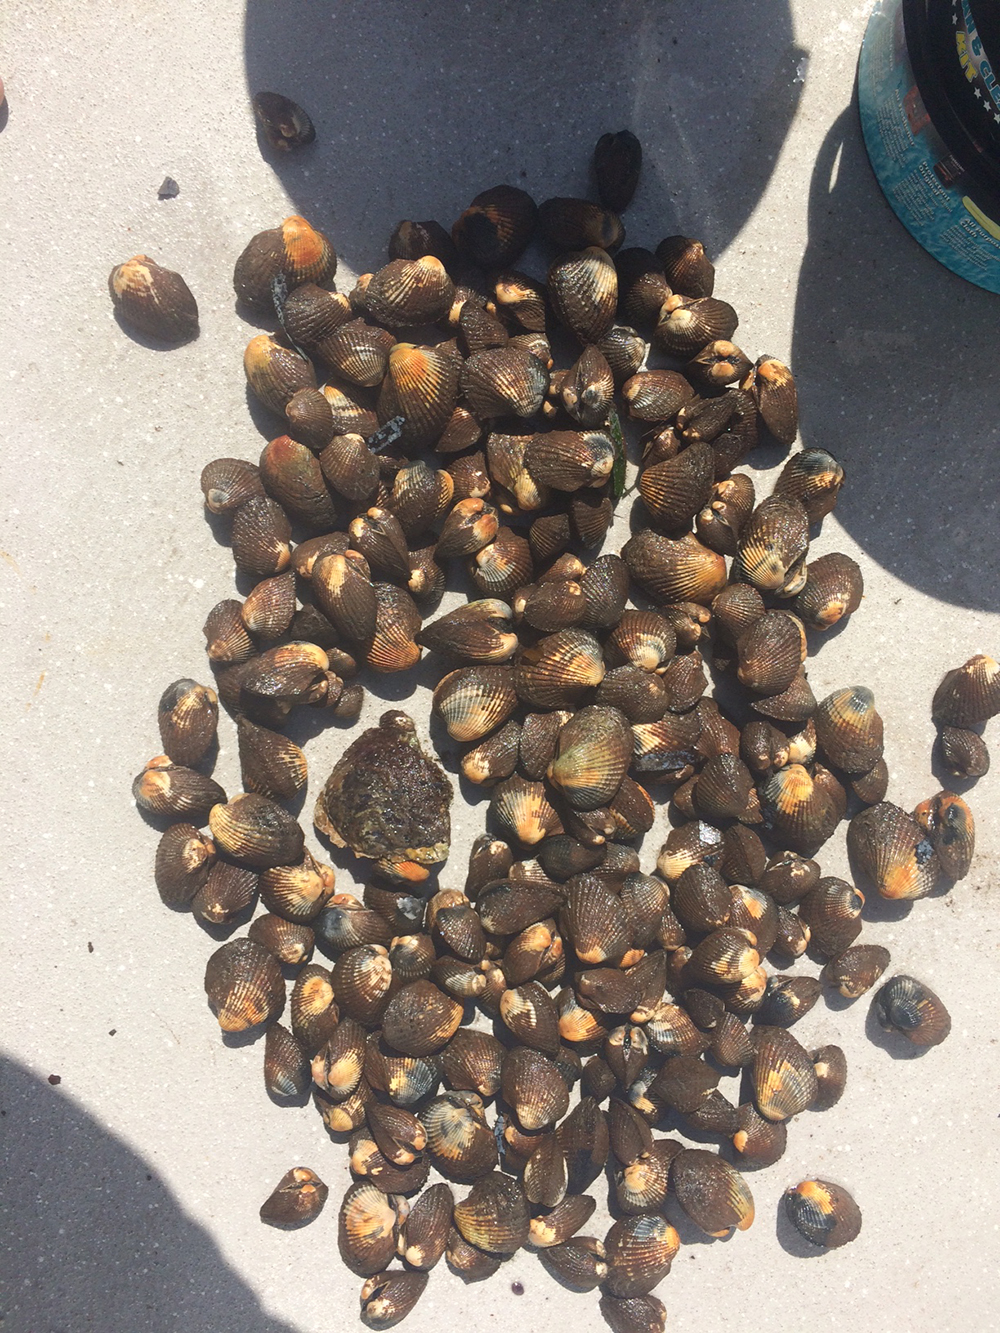 A large amount of cockles on the ground for the purpose of taking a photo